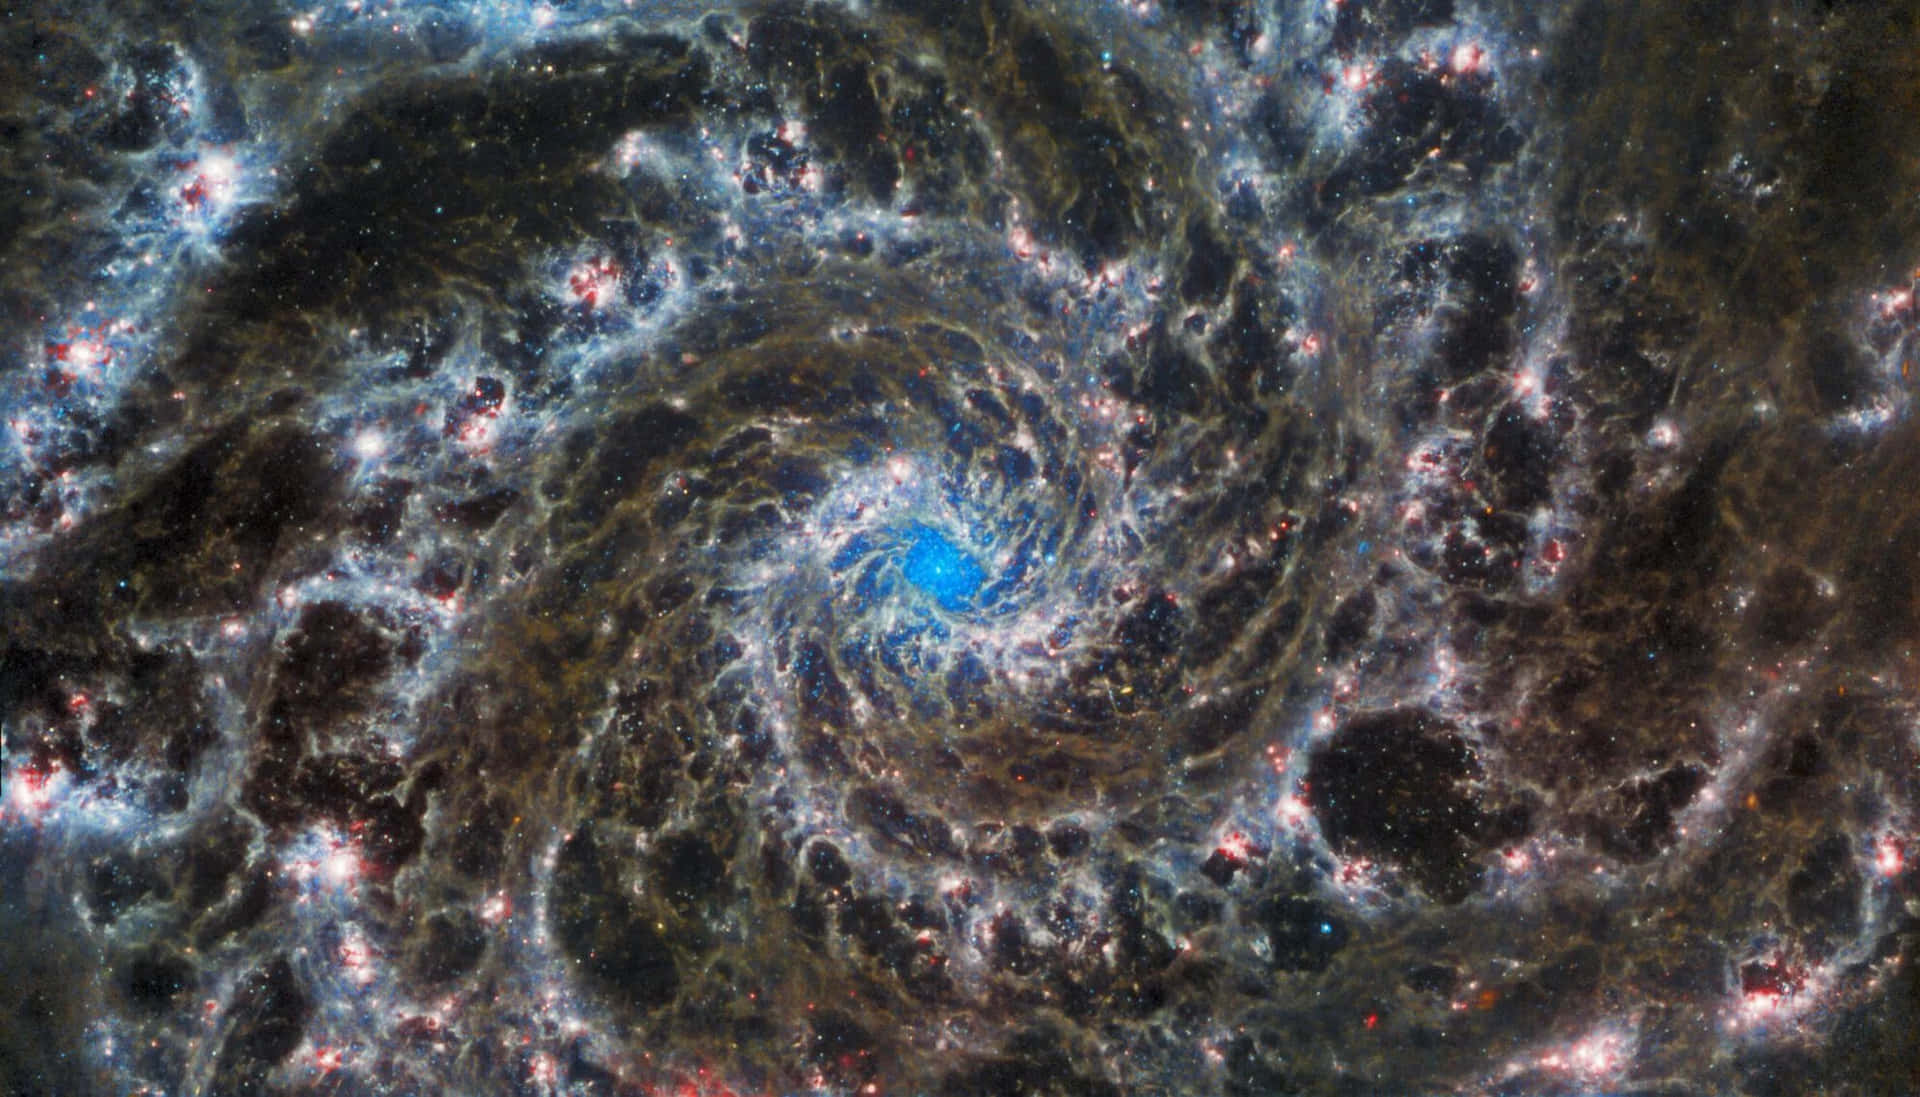 Take a tour of the universe with this stunning photo of a galaxy taken by NASA